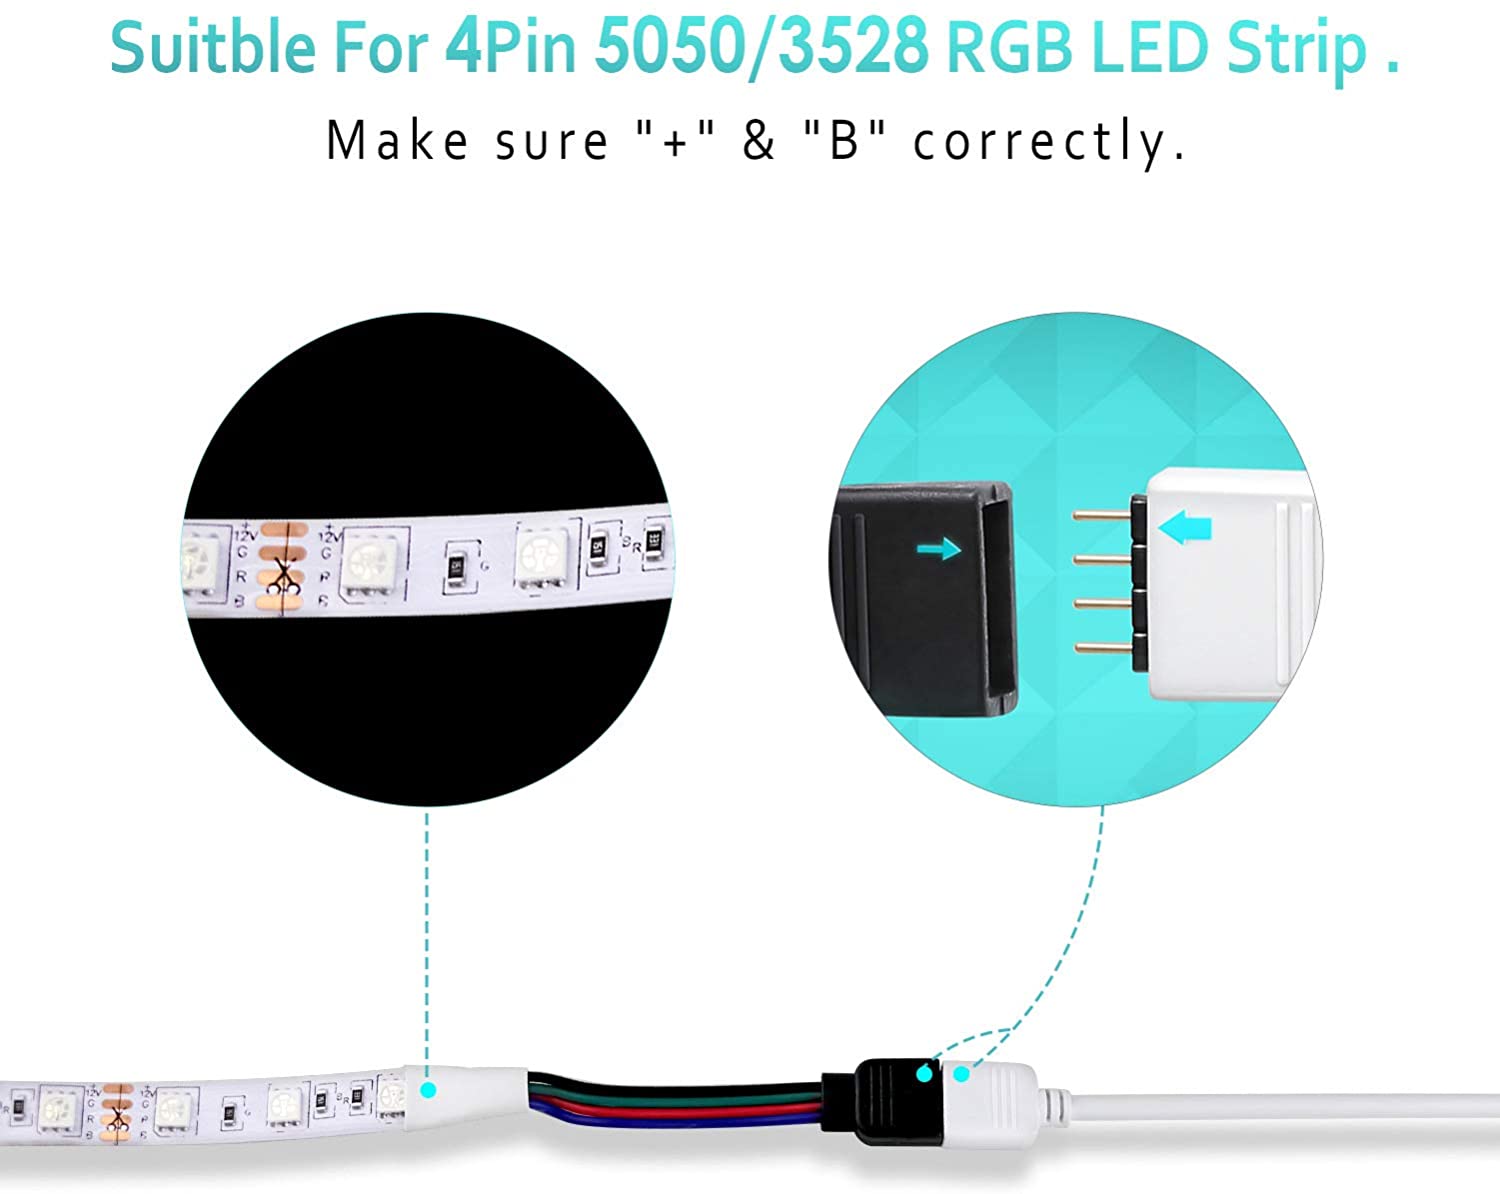 1 Metre DC 12V/24V RGB LED Strip Extension Cable LED Strip Connector 4 Pin Soldless Strip Jumper Cables Kit with Connector for 5050 3528 - ATOM LED